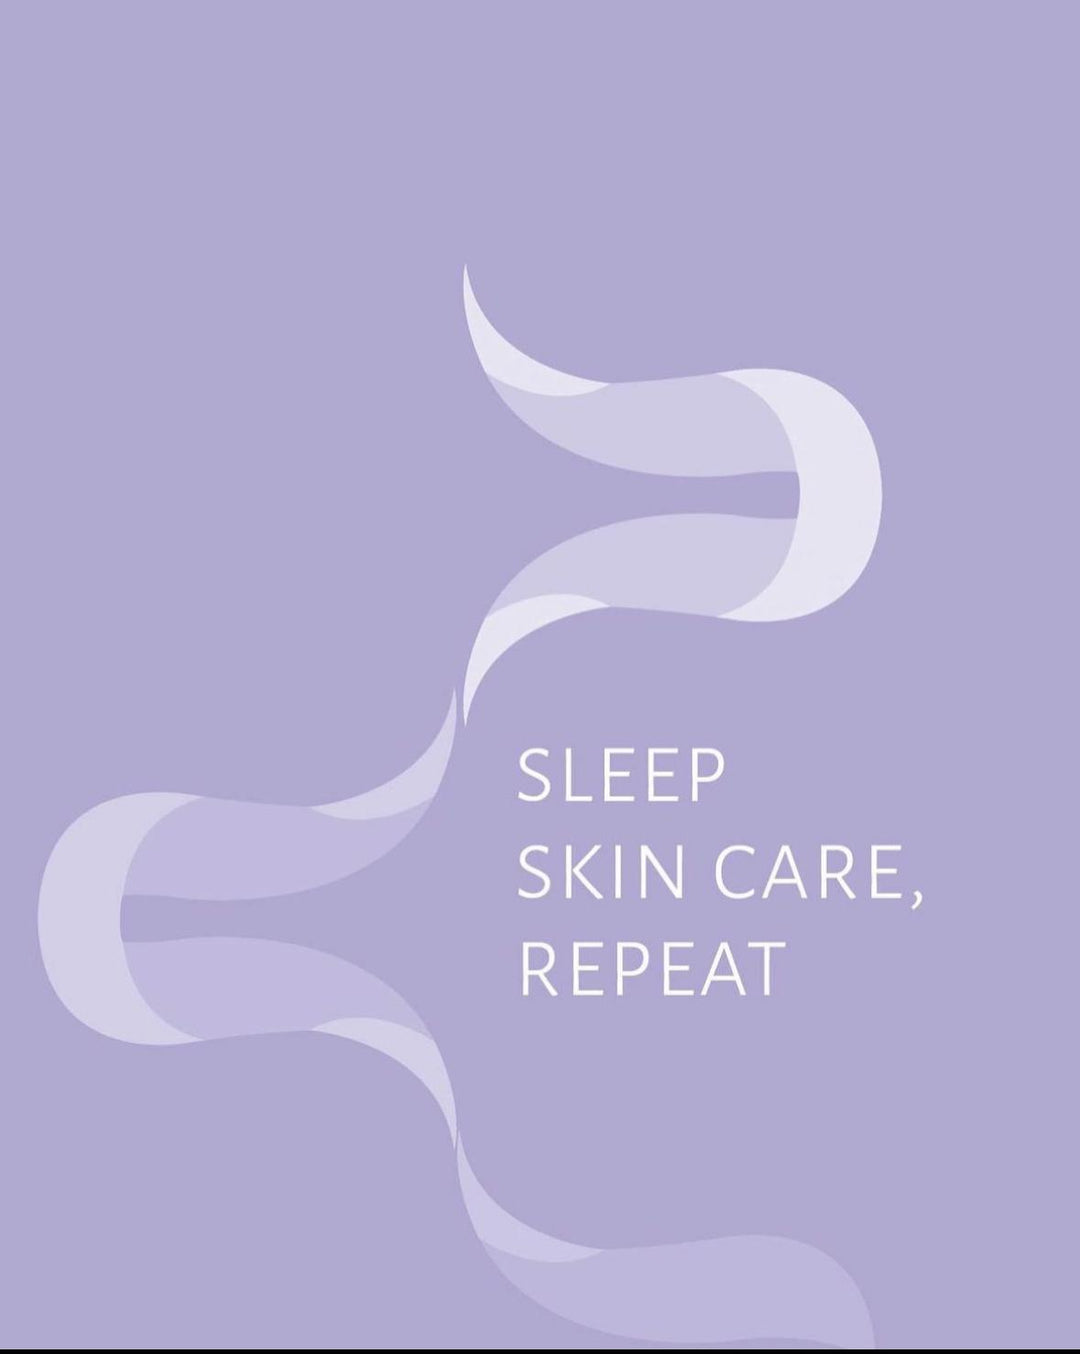 Skincare tips for incorporating Kawar Dead Sea cosmetics into a daily routine!